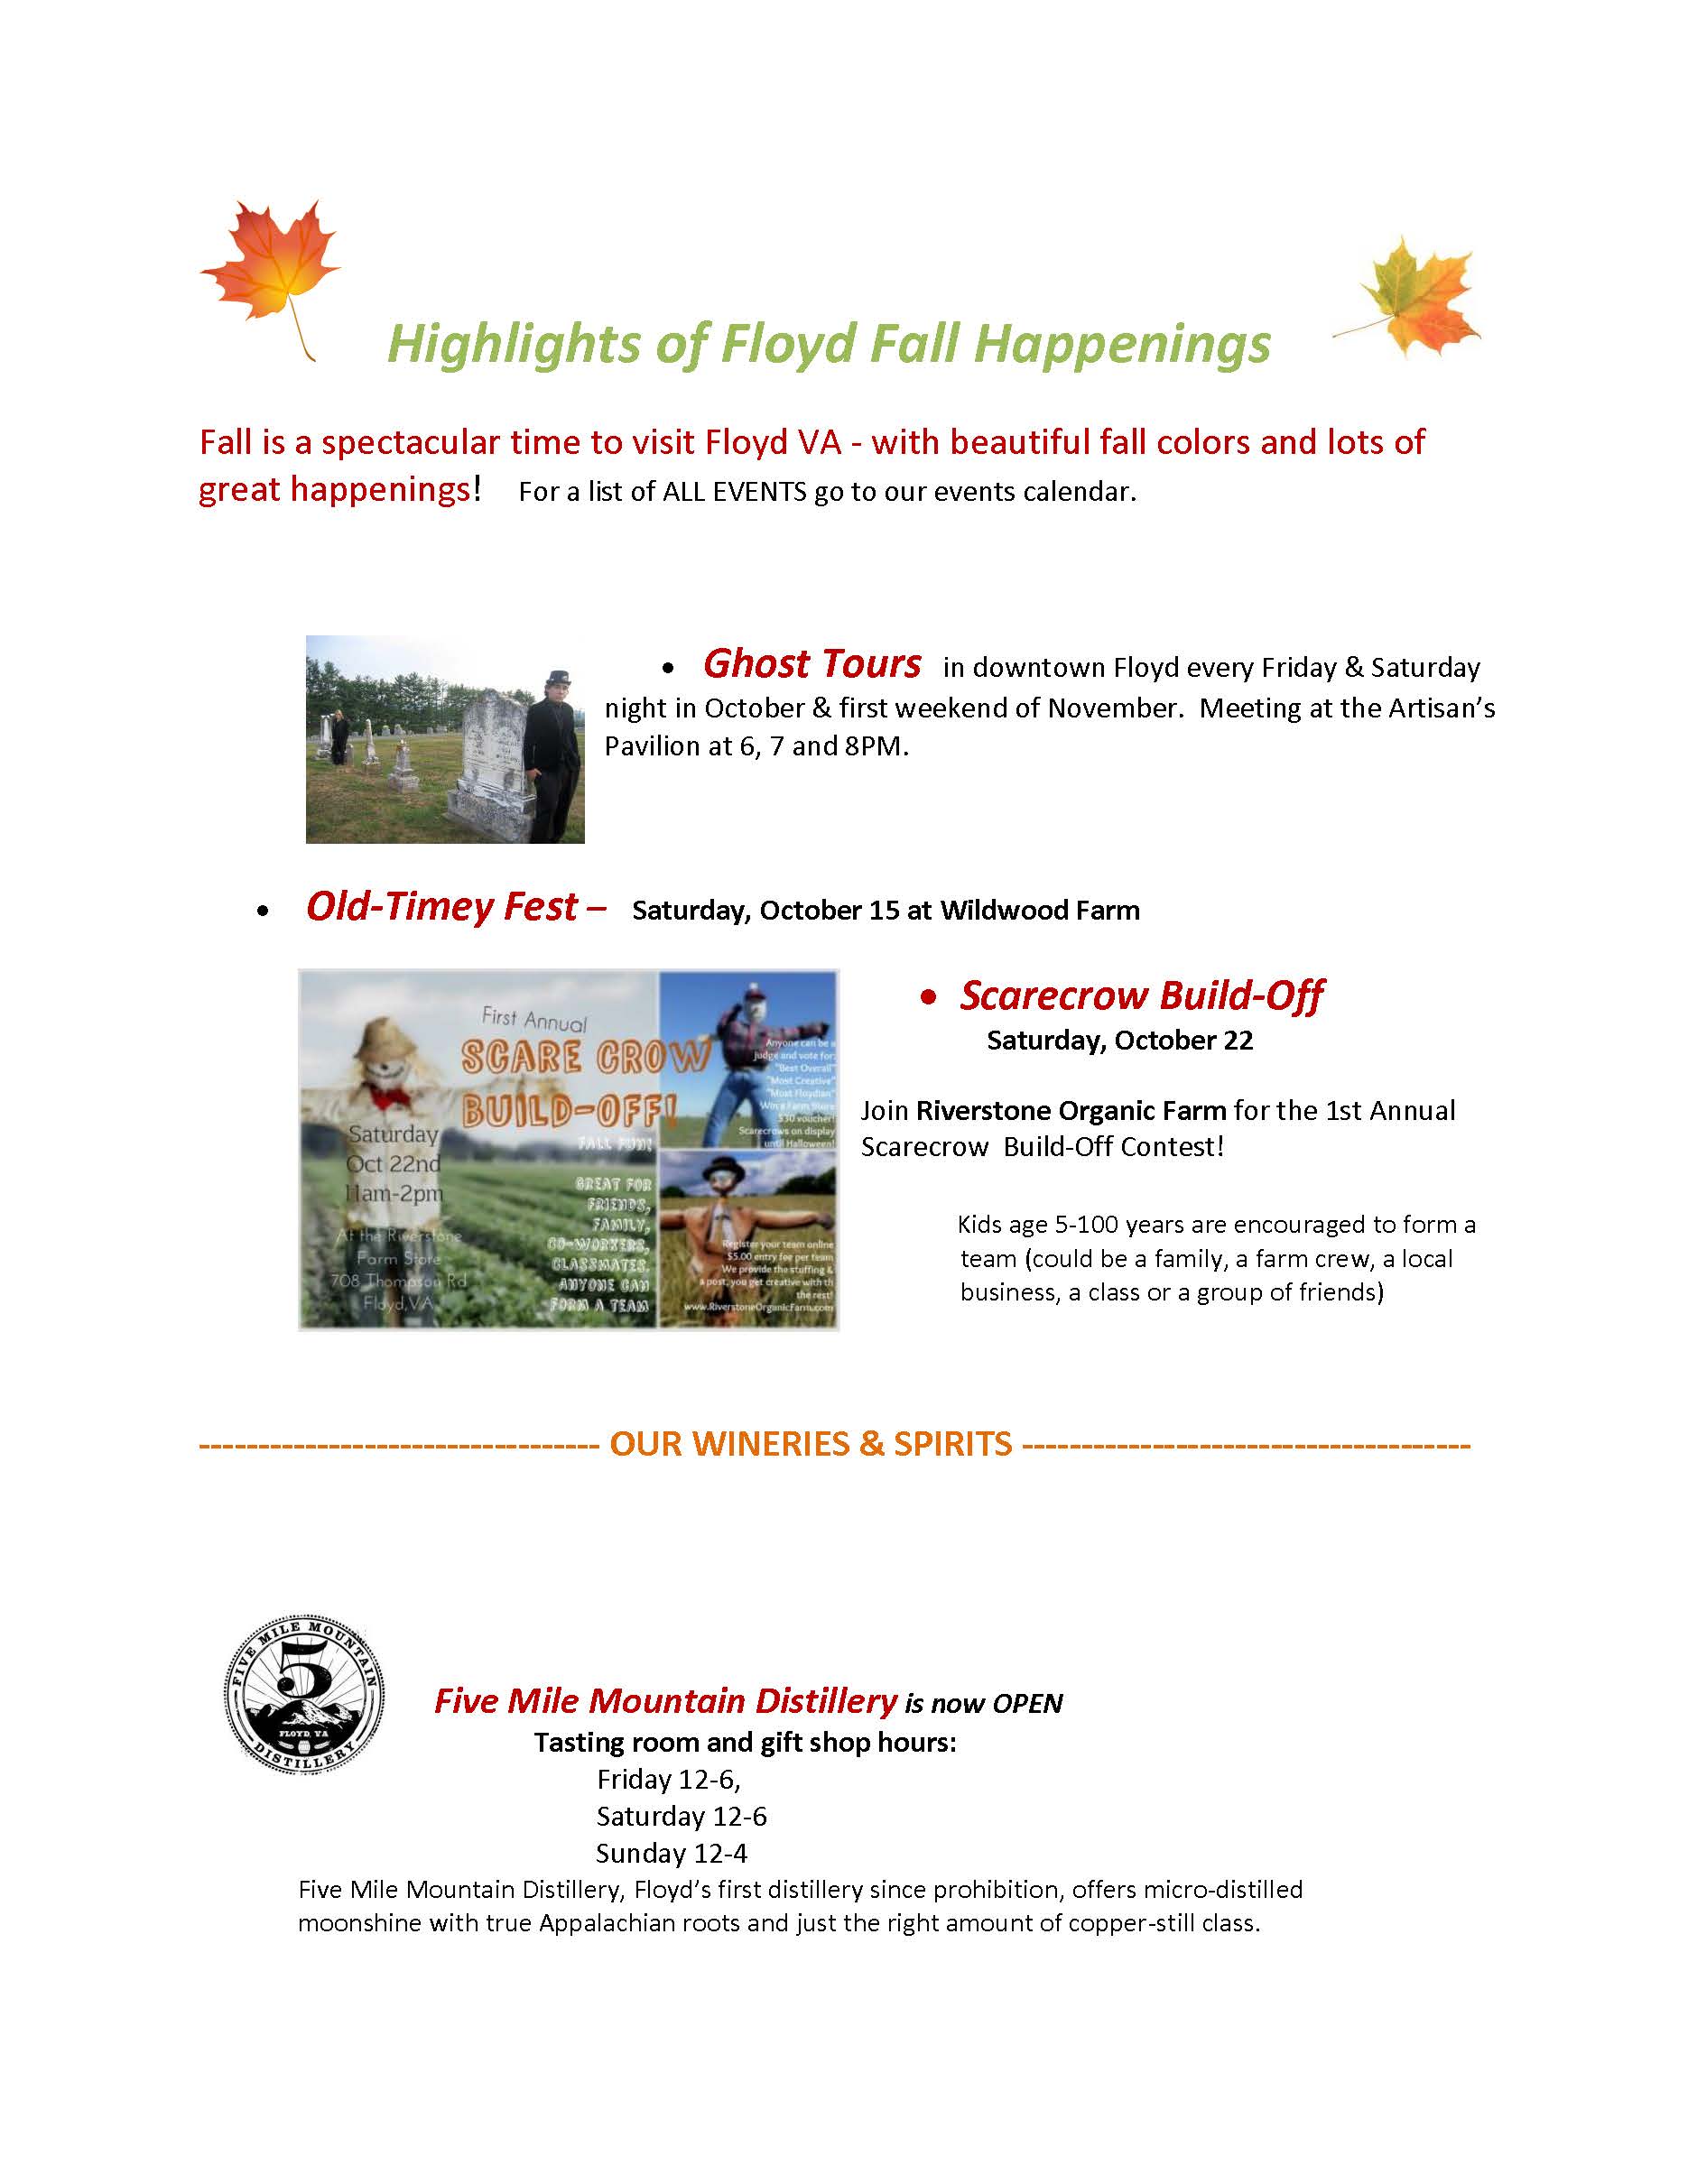 fall-happenings-2016_page_1